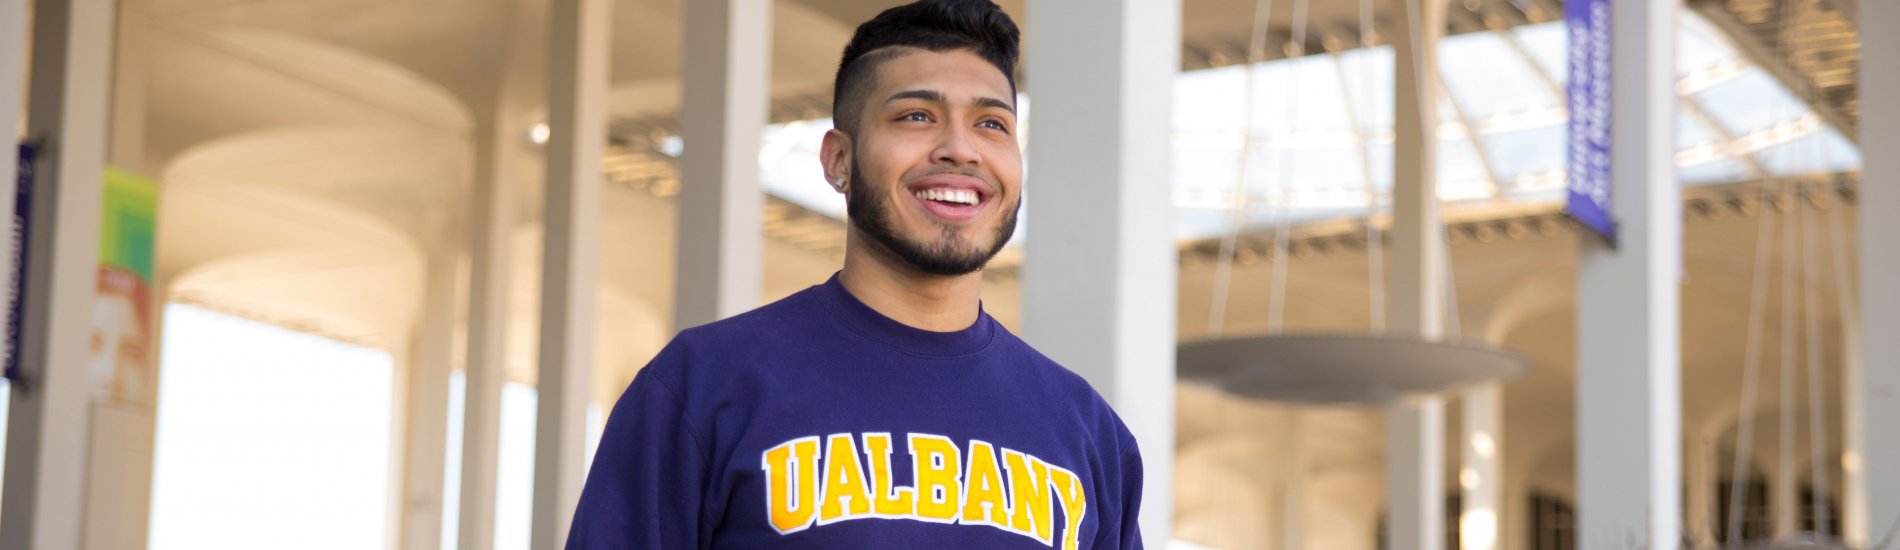 A student wearing a purple UAlbany sweatshirt smiles and poses for a photo on campus, with the Podium arches visible behind him